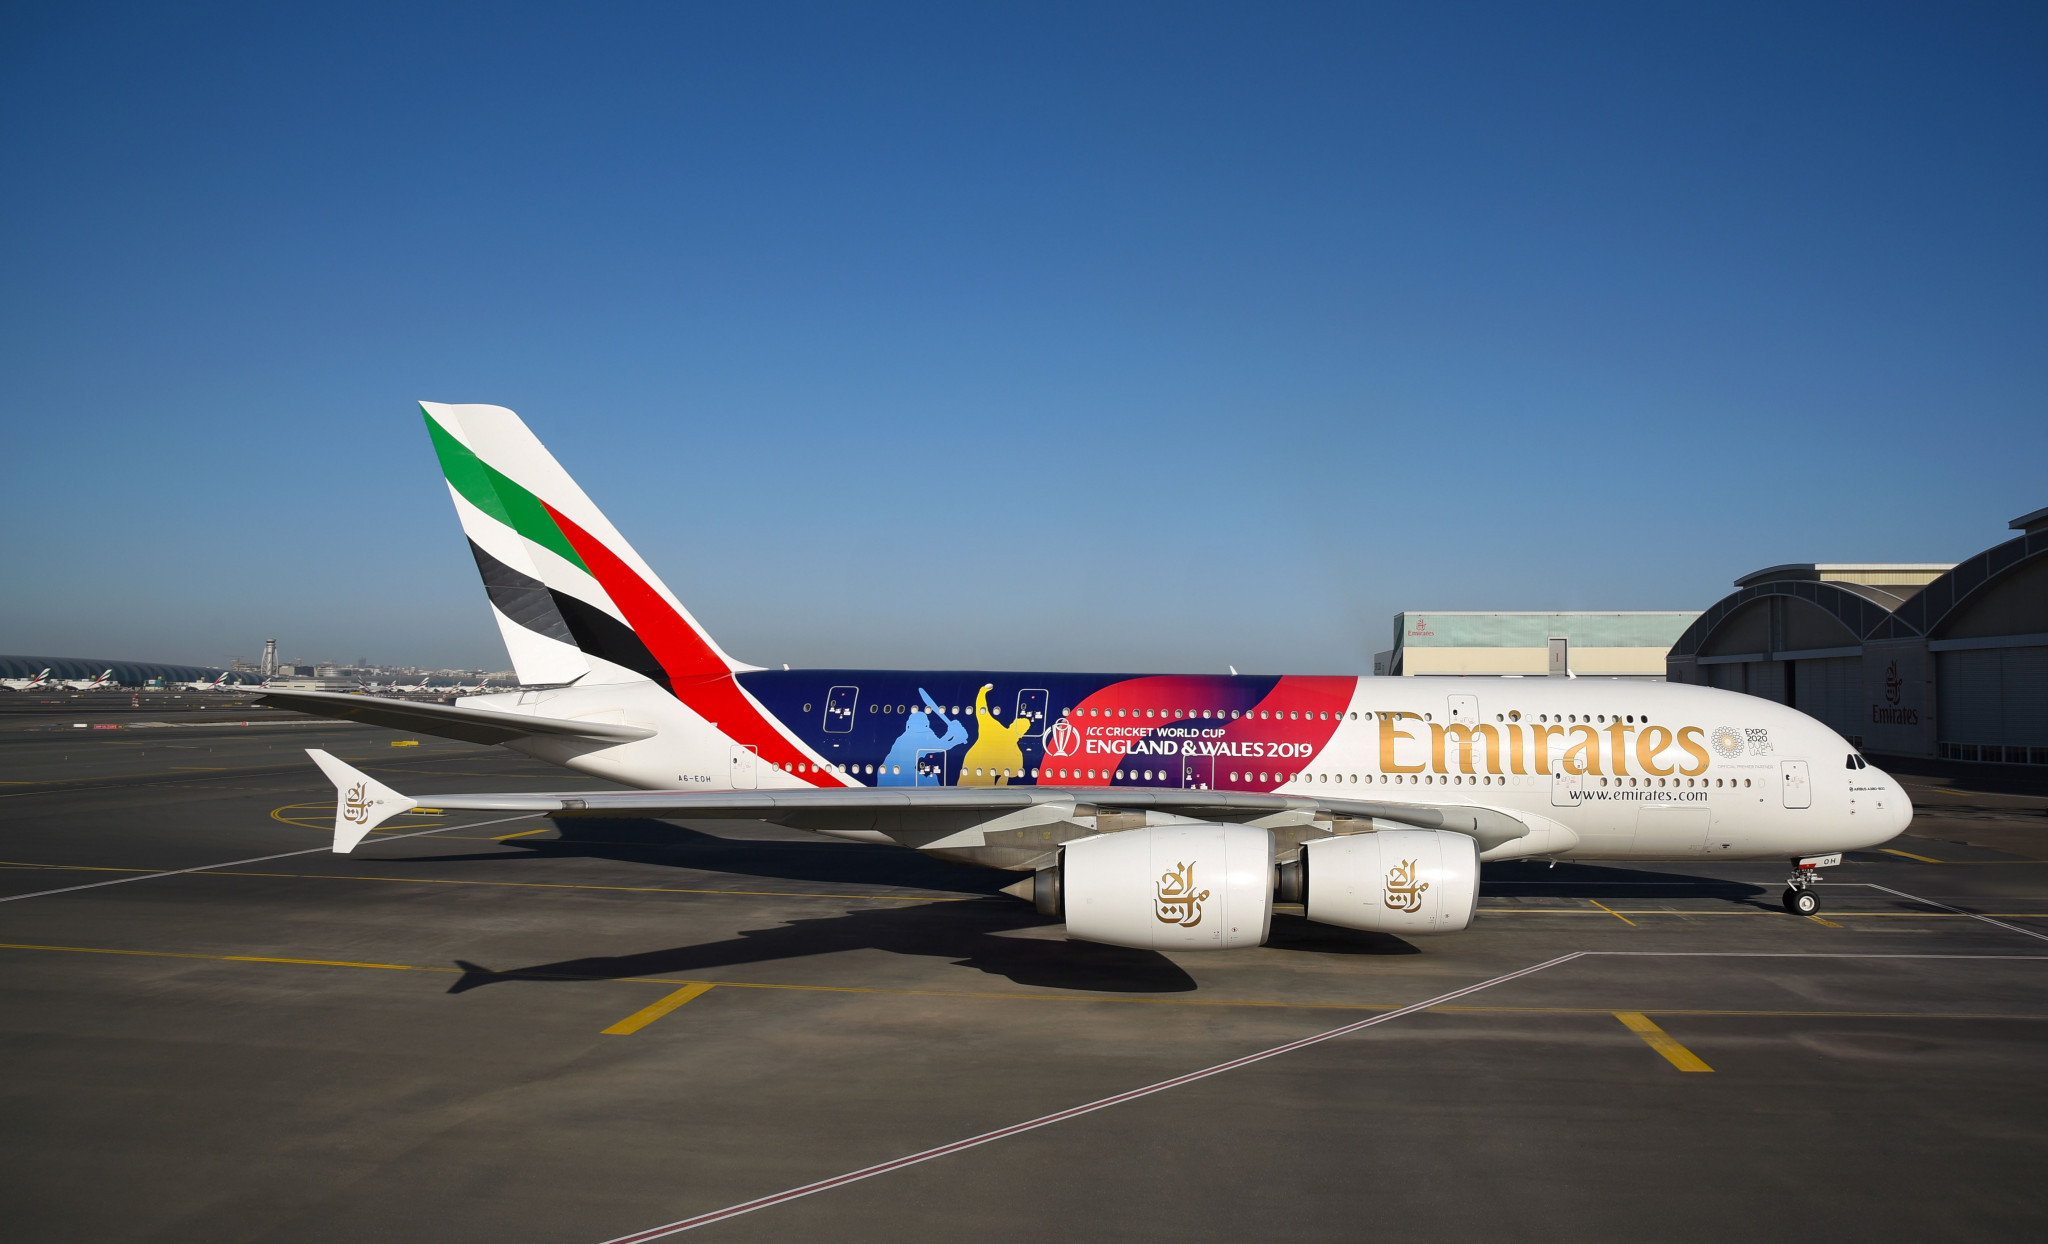 Airlines add special World Cup liveries